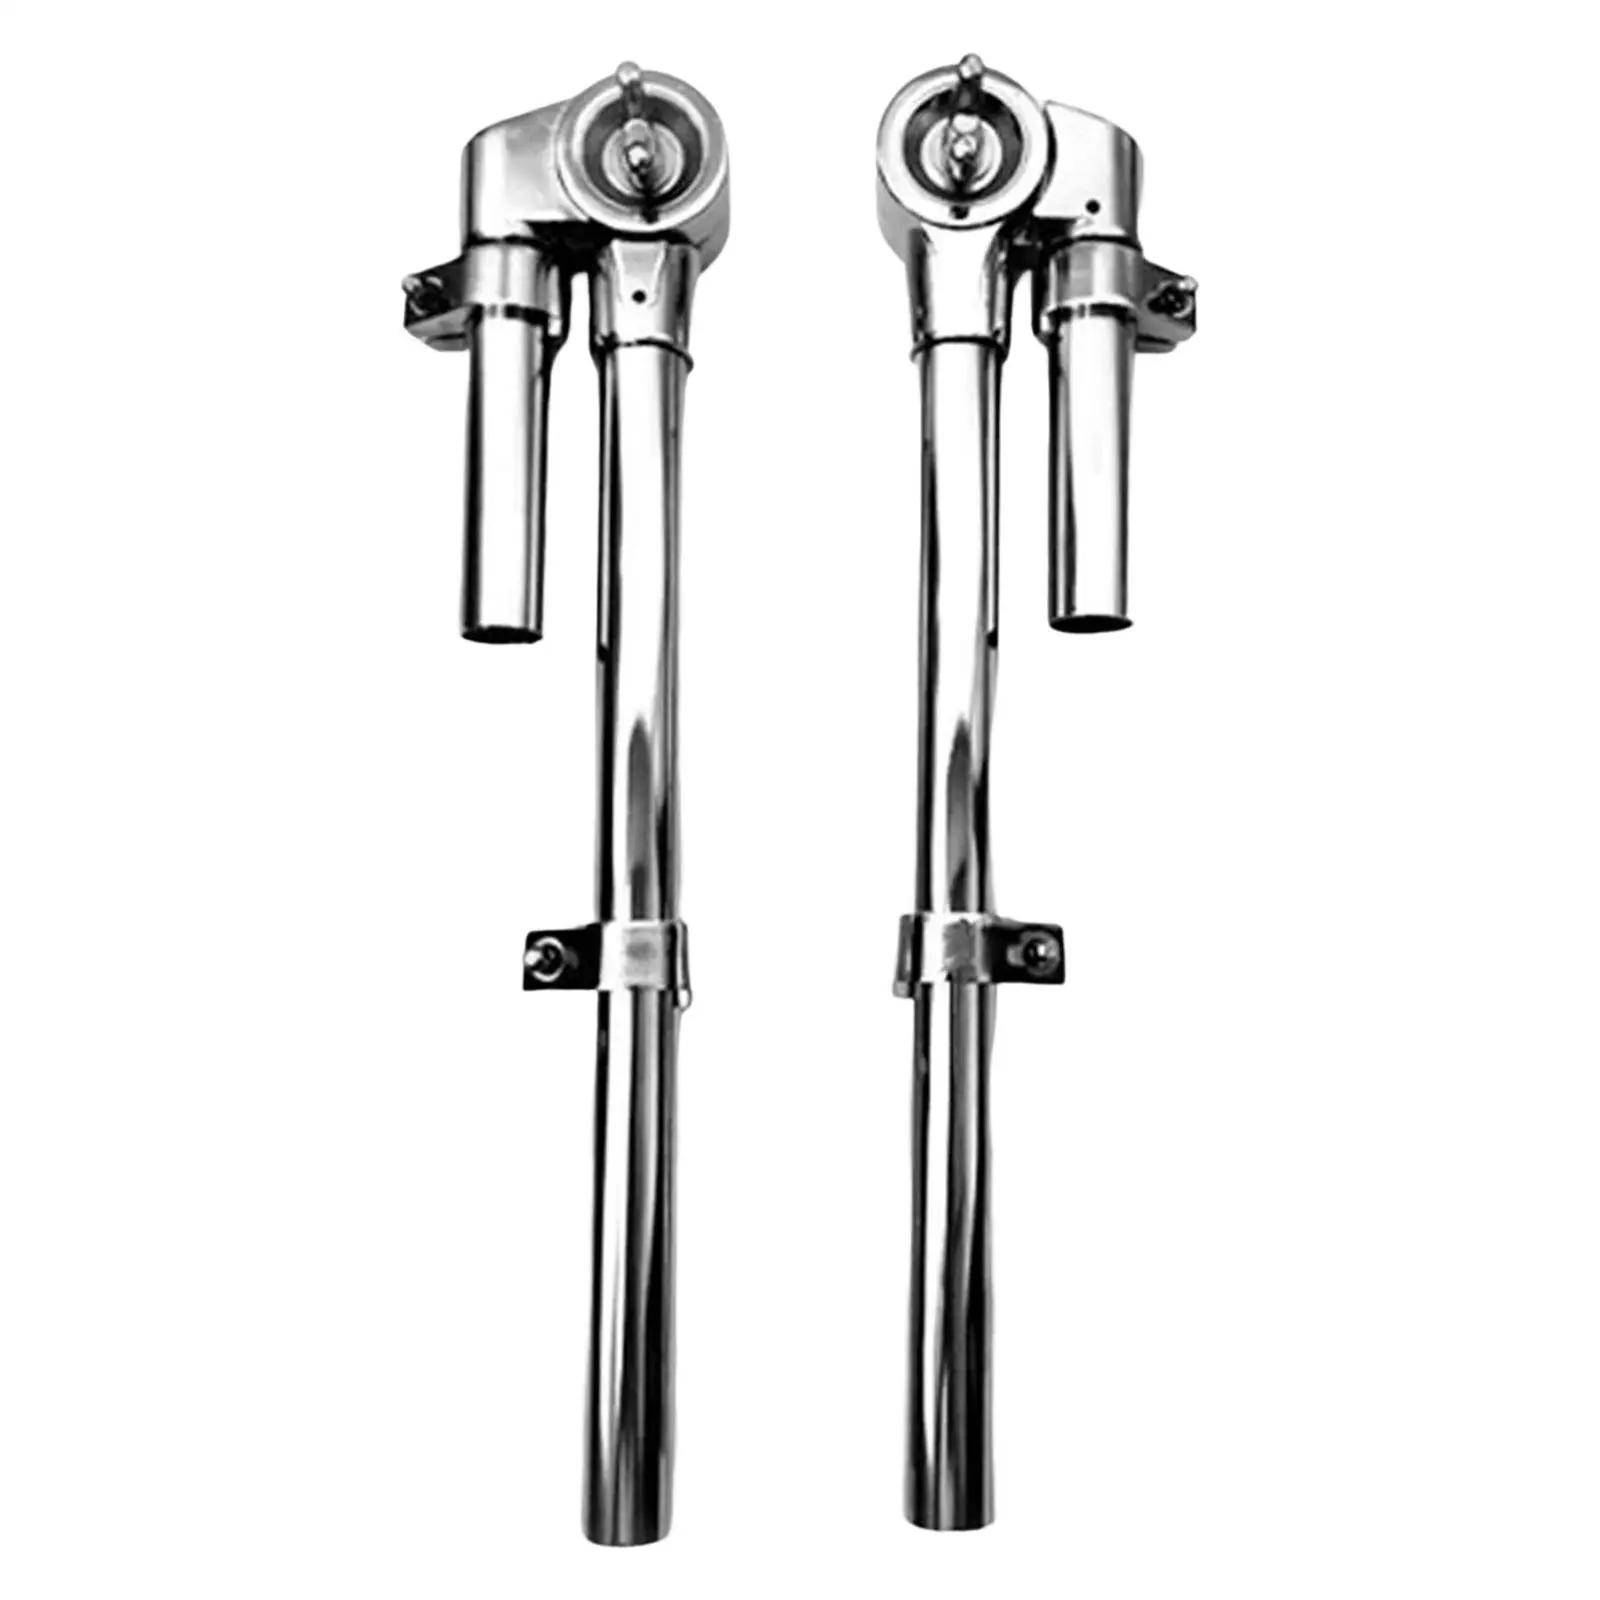 2x Drum Holder Stand Hardware for Tom Drum Percussion Instrument Replacement